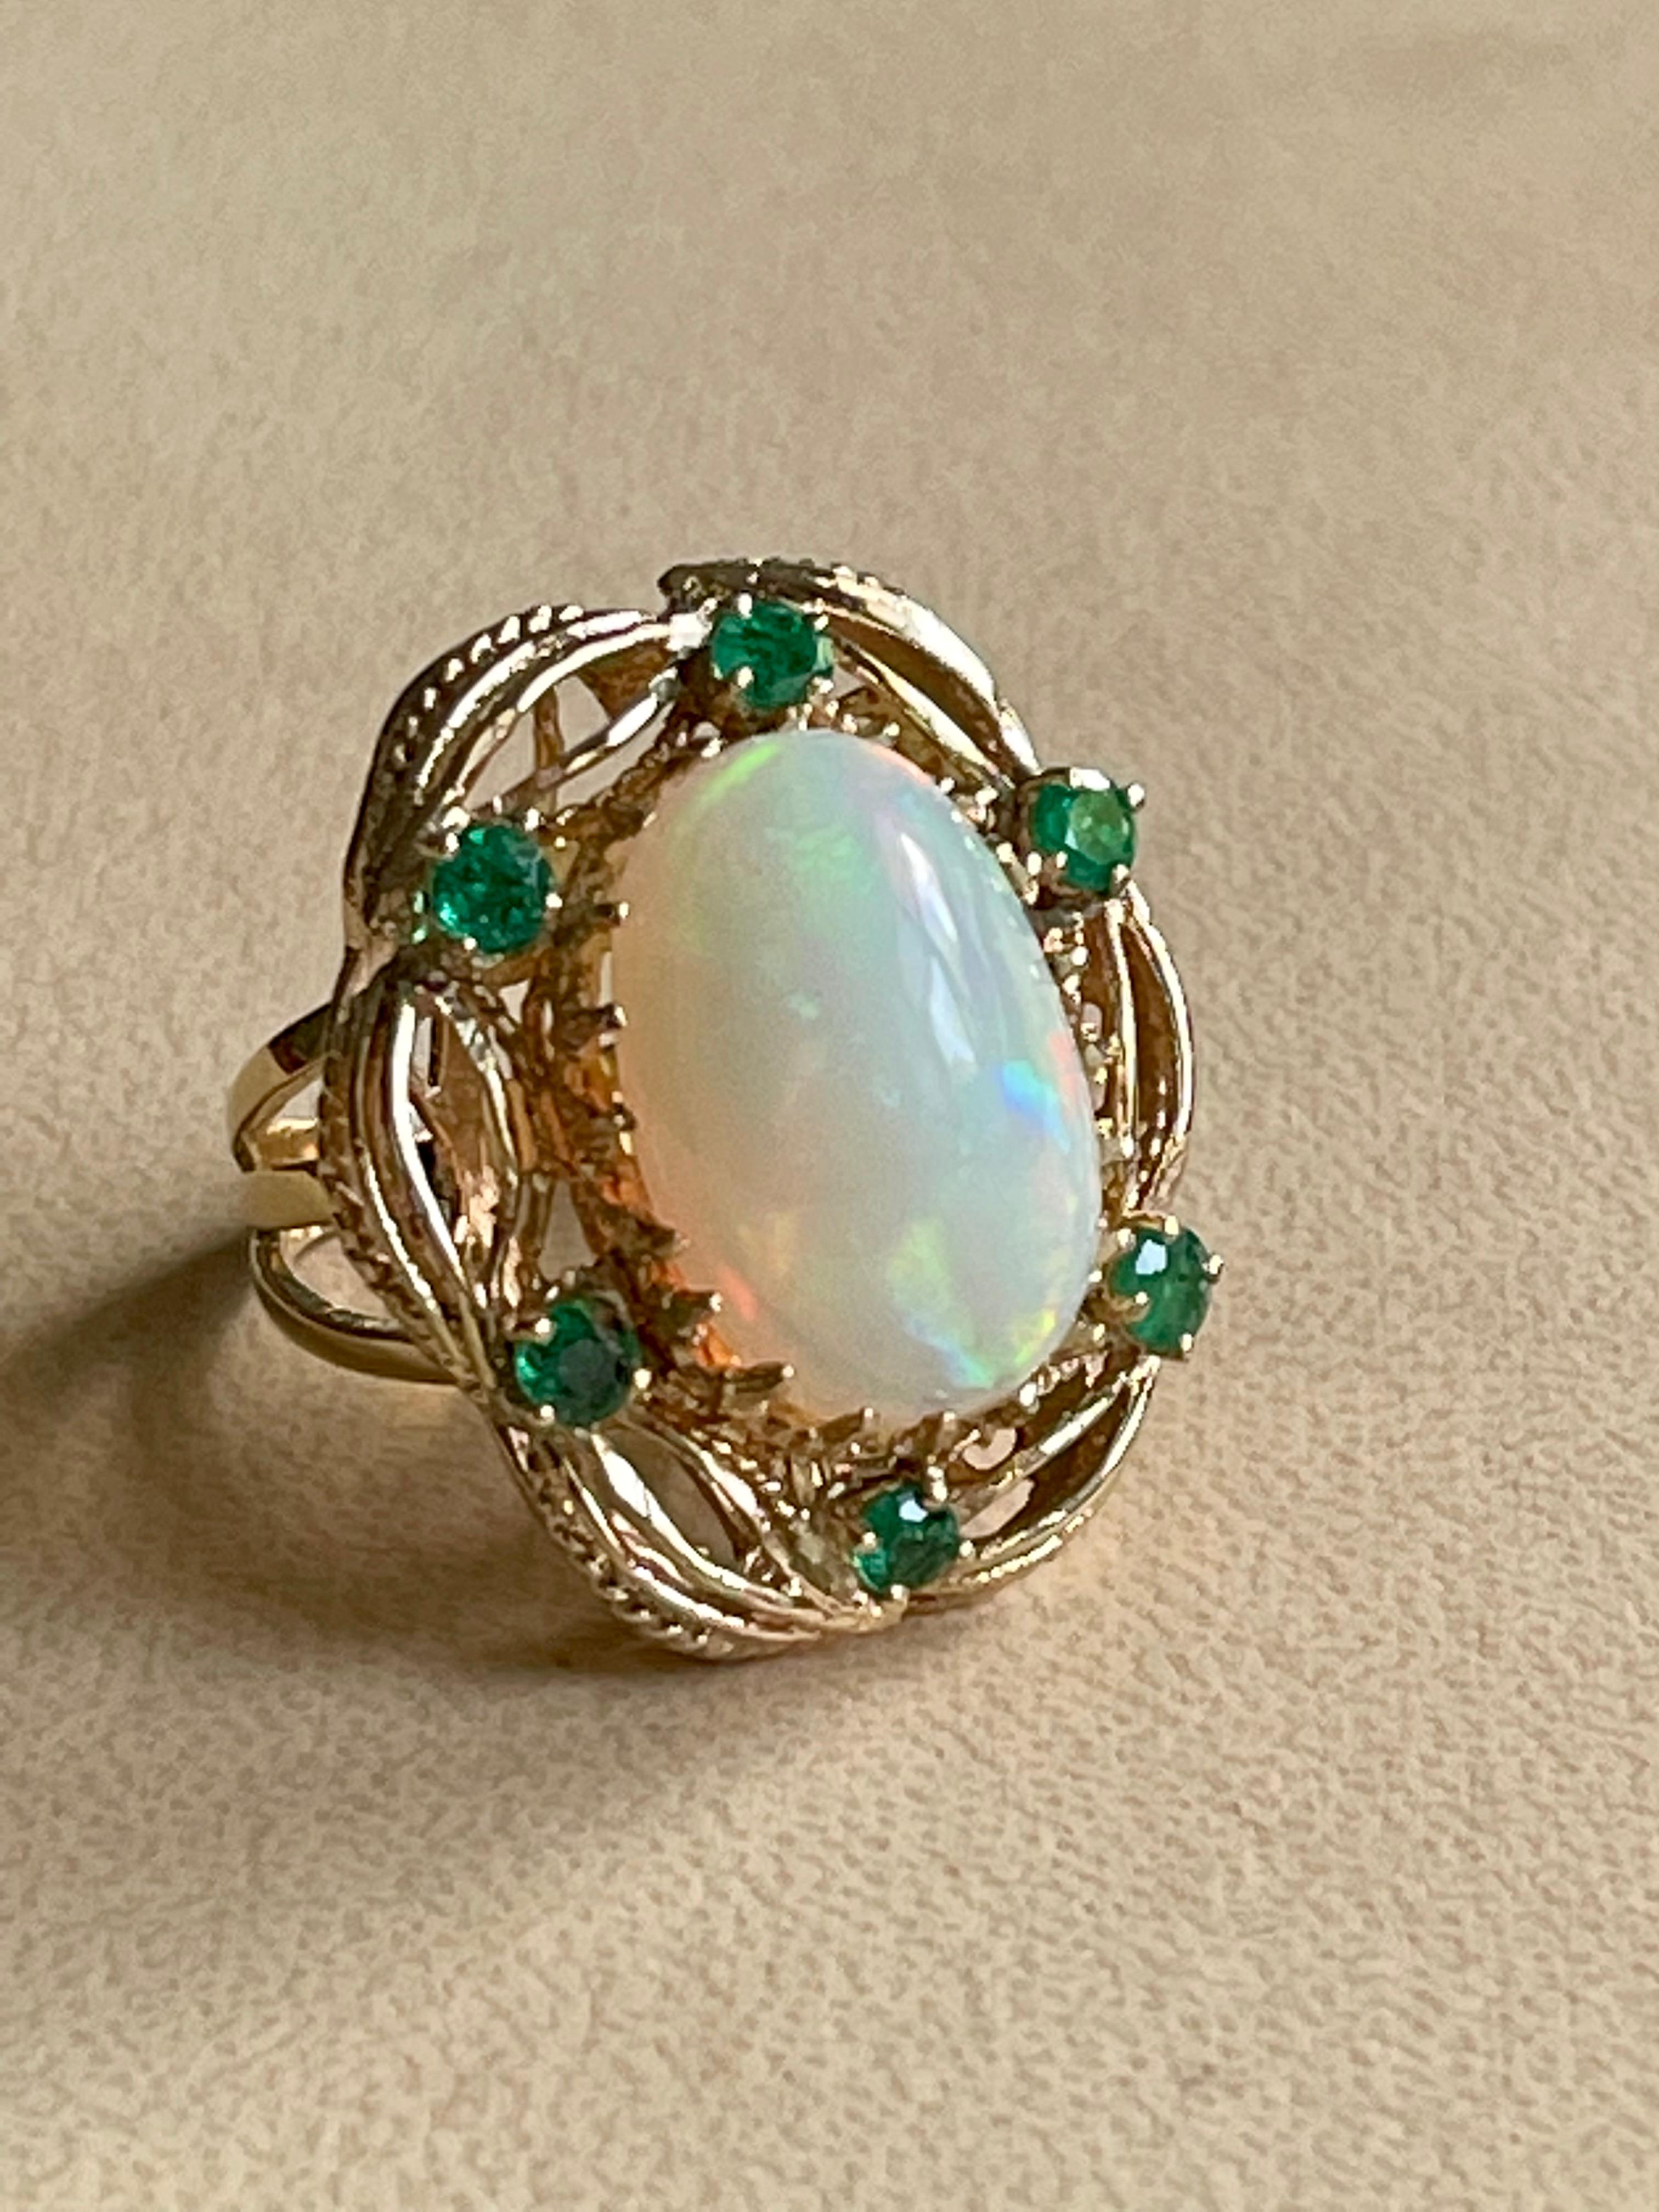 Women's 15 Carat Oval Shape Ethiopian Opal Cocktail Ring 14 Karat Yellow Gold Solid Ring For Sale